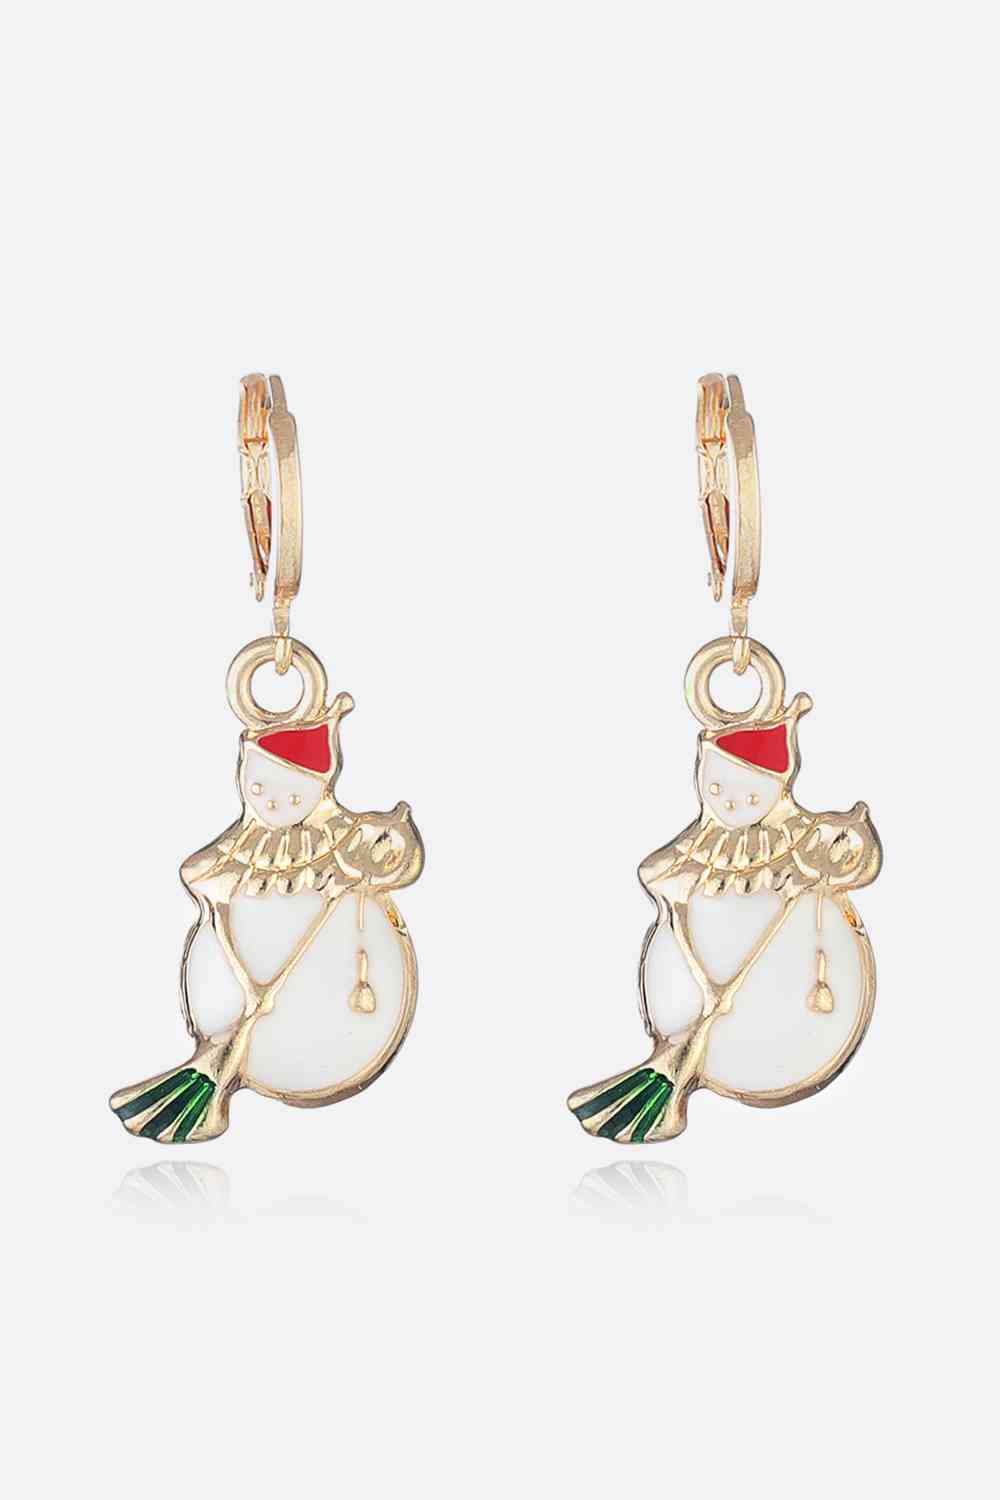 Christmas Alloy Earrings for Women Style D One Size